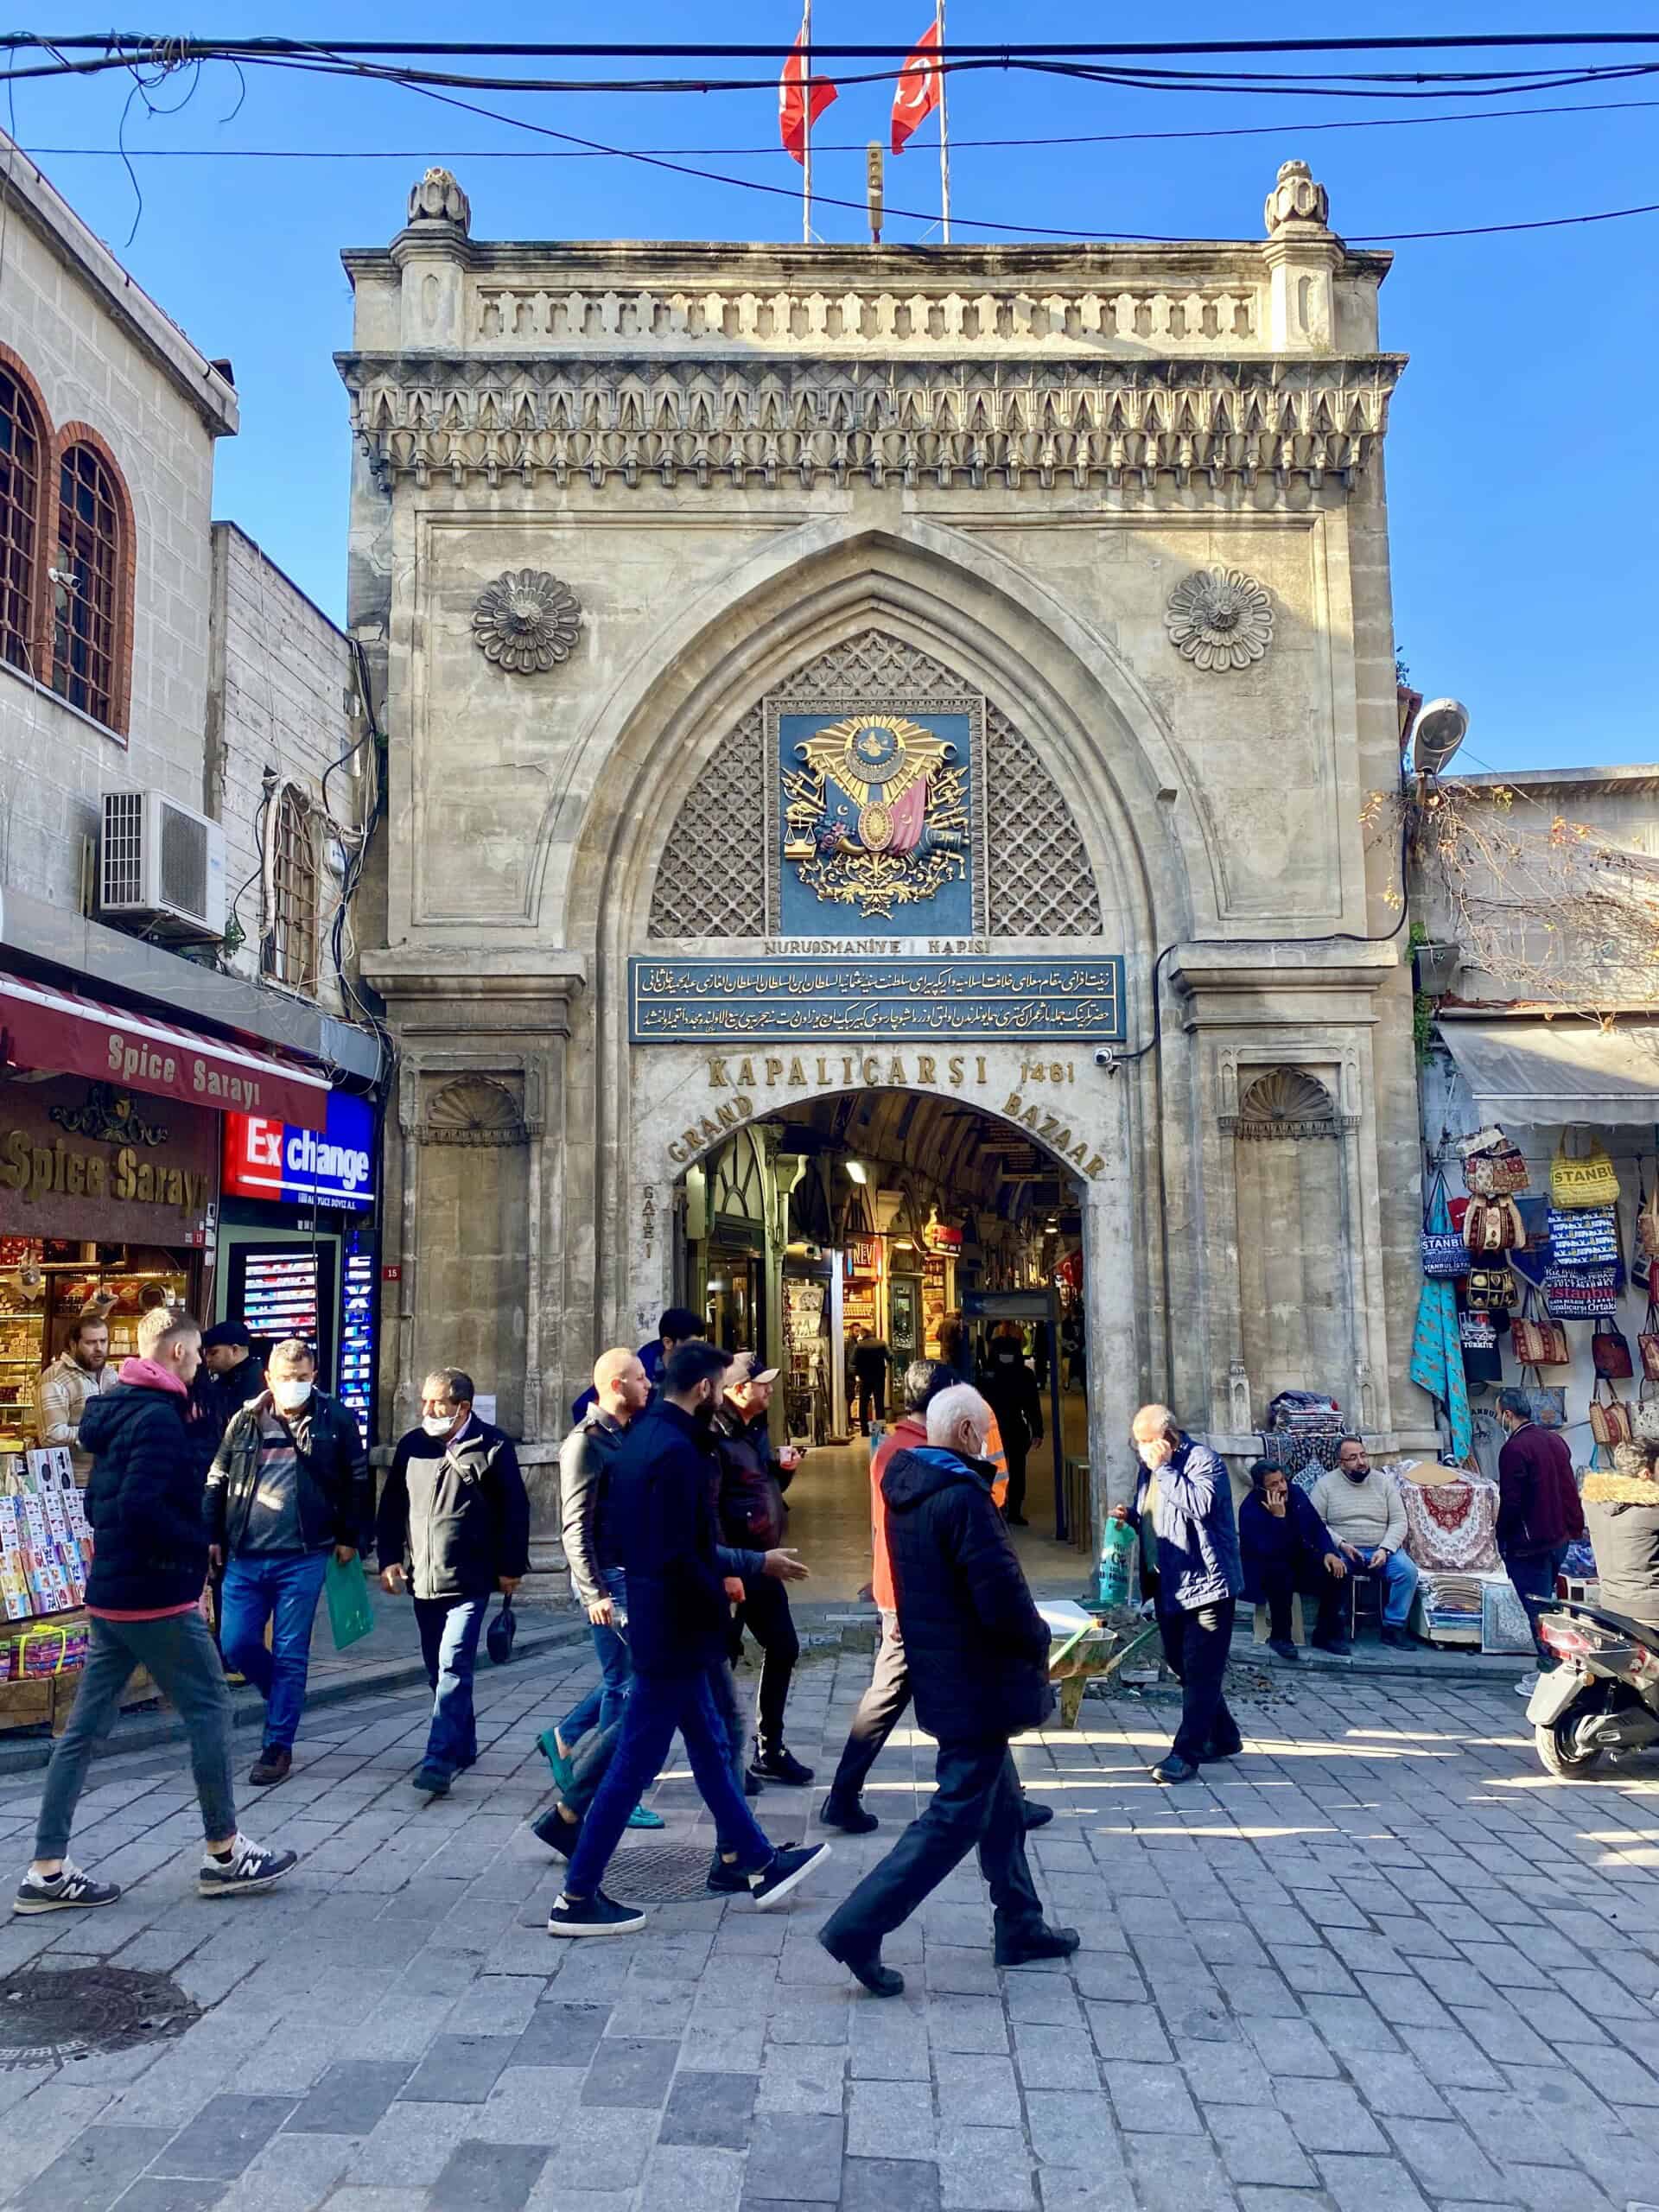 A picture of the entrance to the oldest mall in the world established in 1461 Grand Bazaar Turkiye